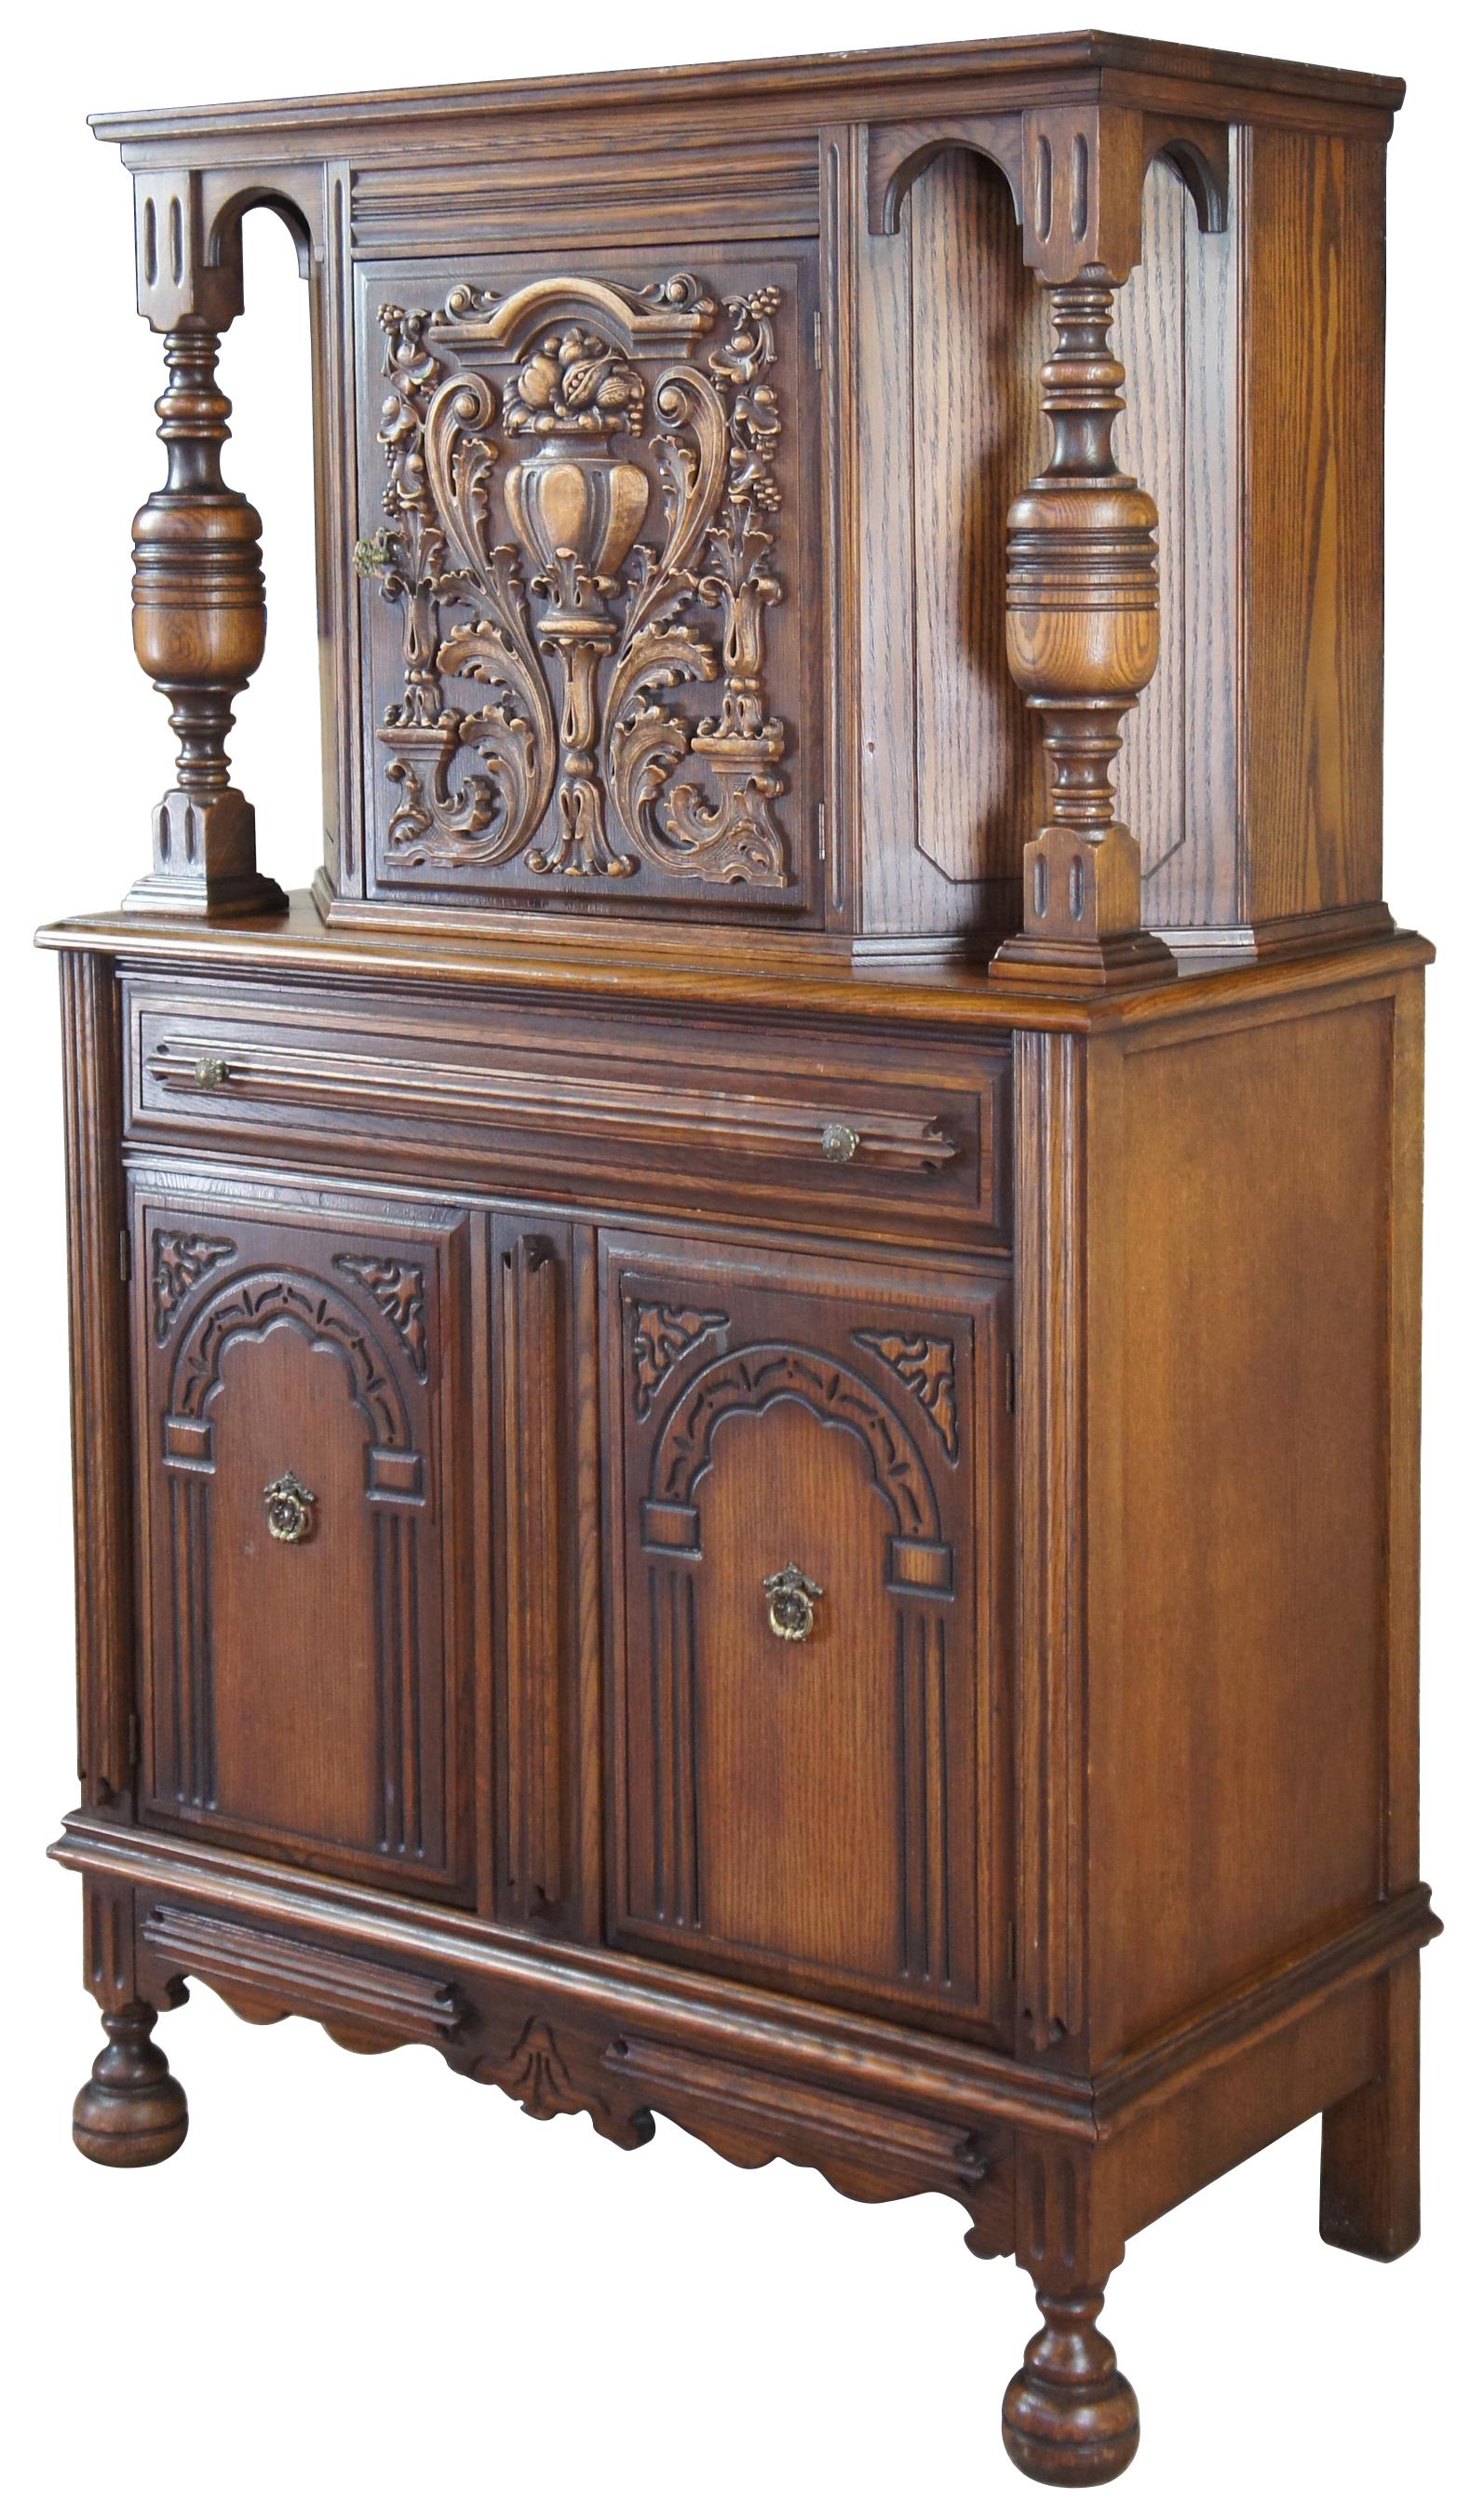 Early 20th century Jacobean / Elizabethan revival court cupbourd by Basic Furniture Company out of Waynesboro, Virginia. Made from oak with an upper hutch mounted between two beautifully turned baluster supports. Features a low relief carved door